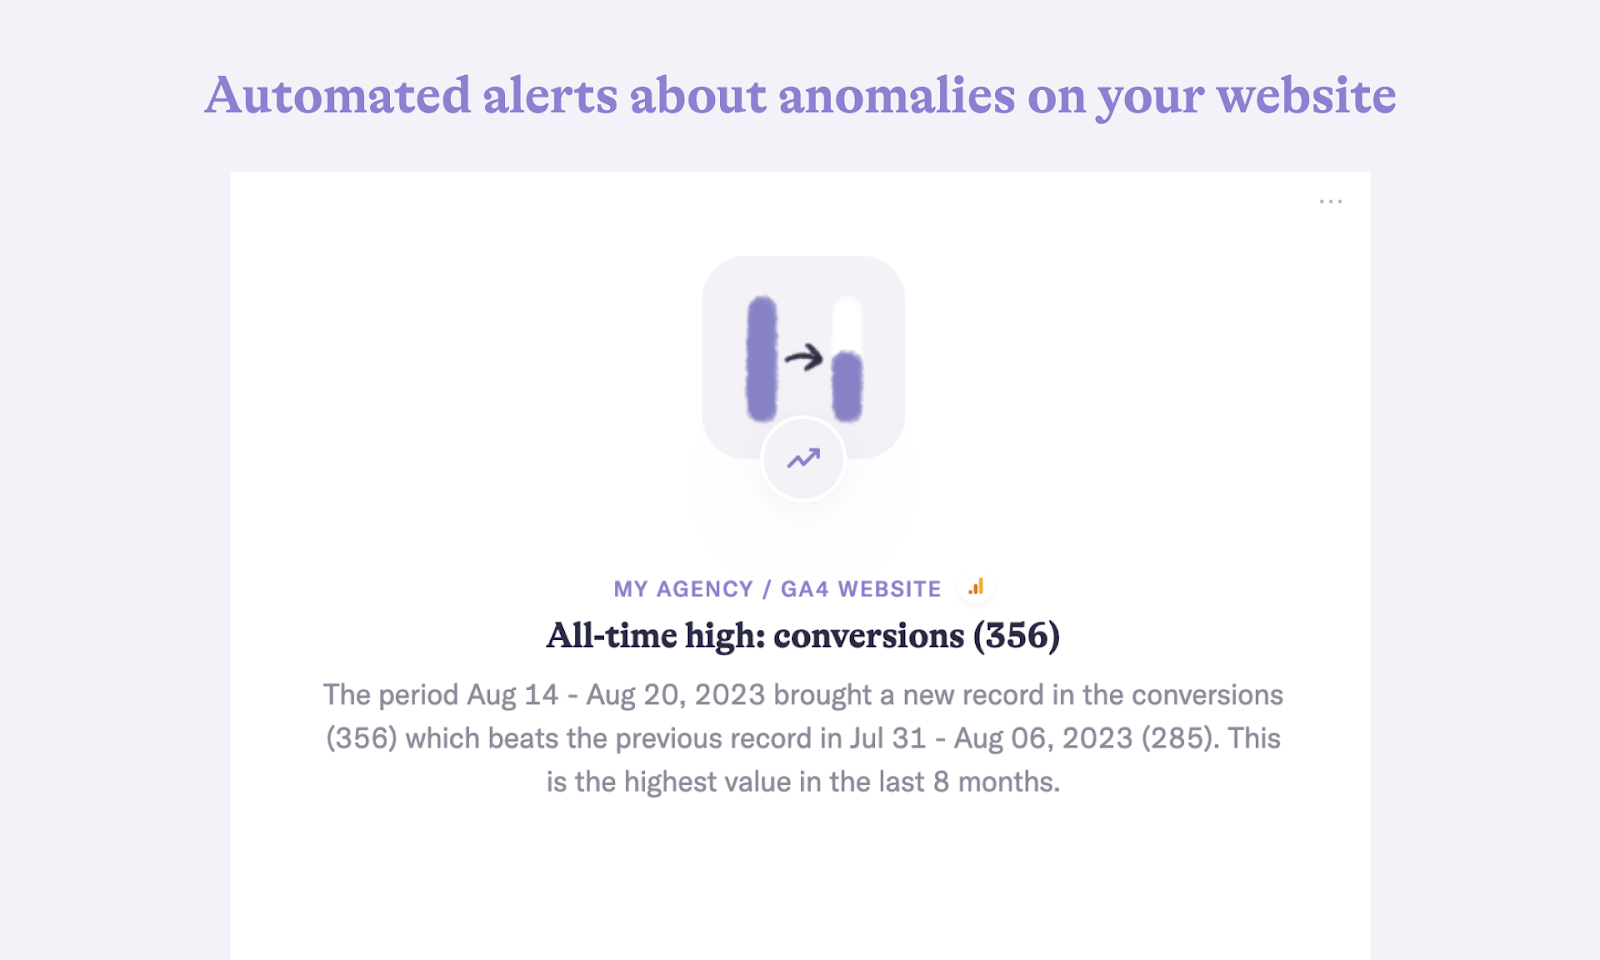 "Automated alerts about anomalies on your website" window